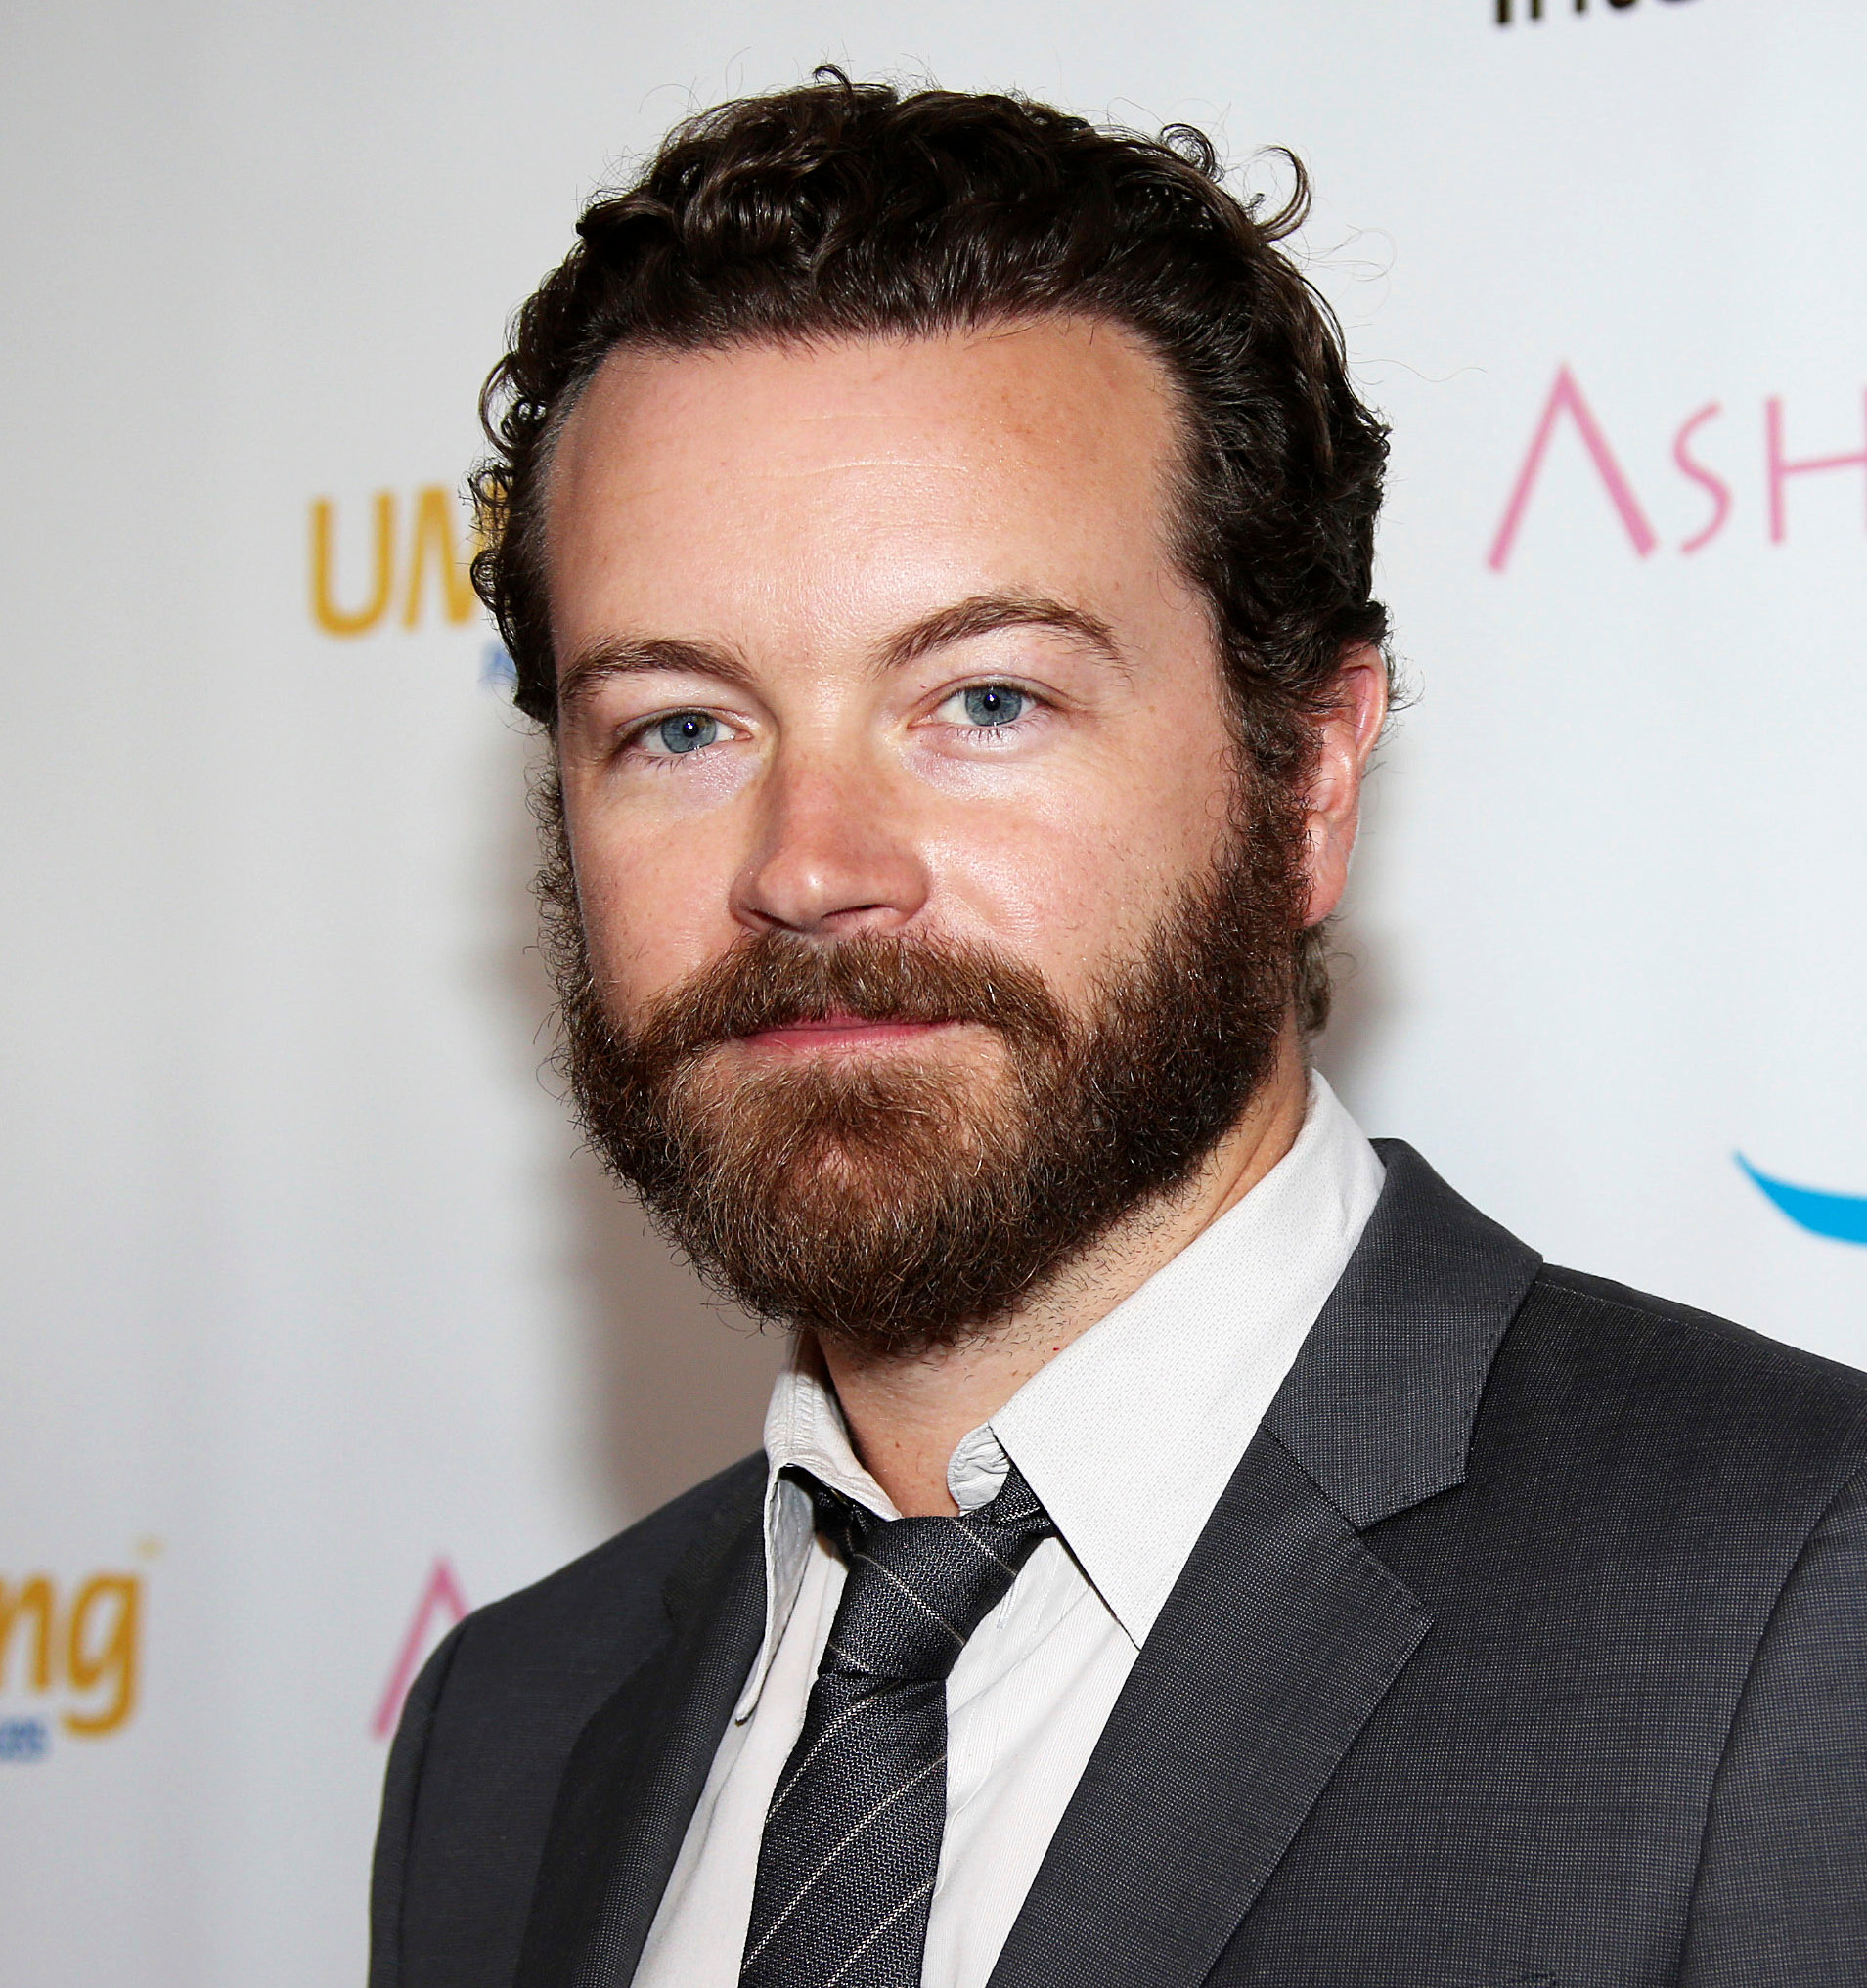 ‘That ’70s Show’ Actor Danny Masterson Charged With Raping 3 Women